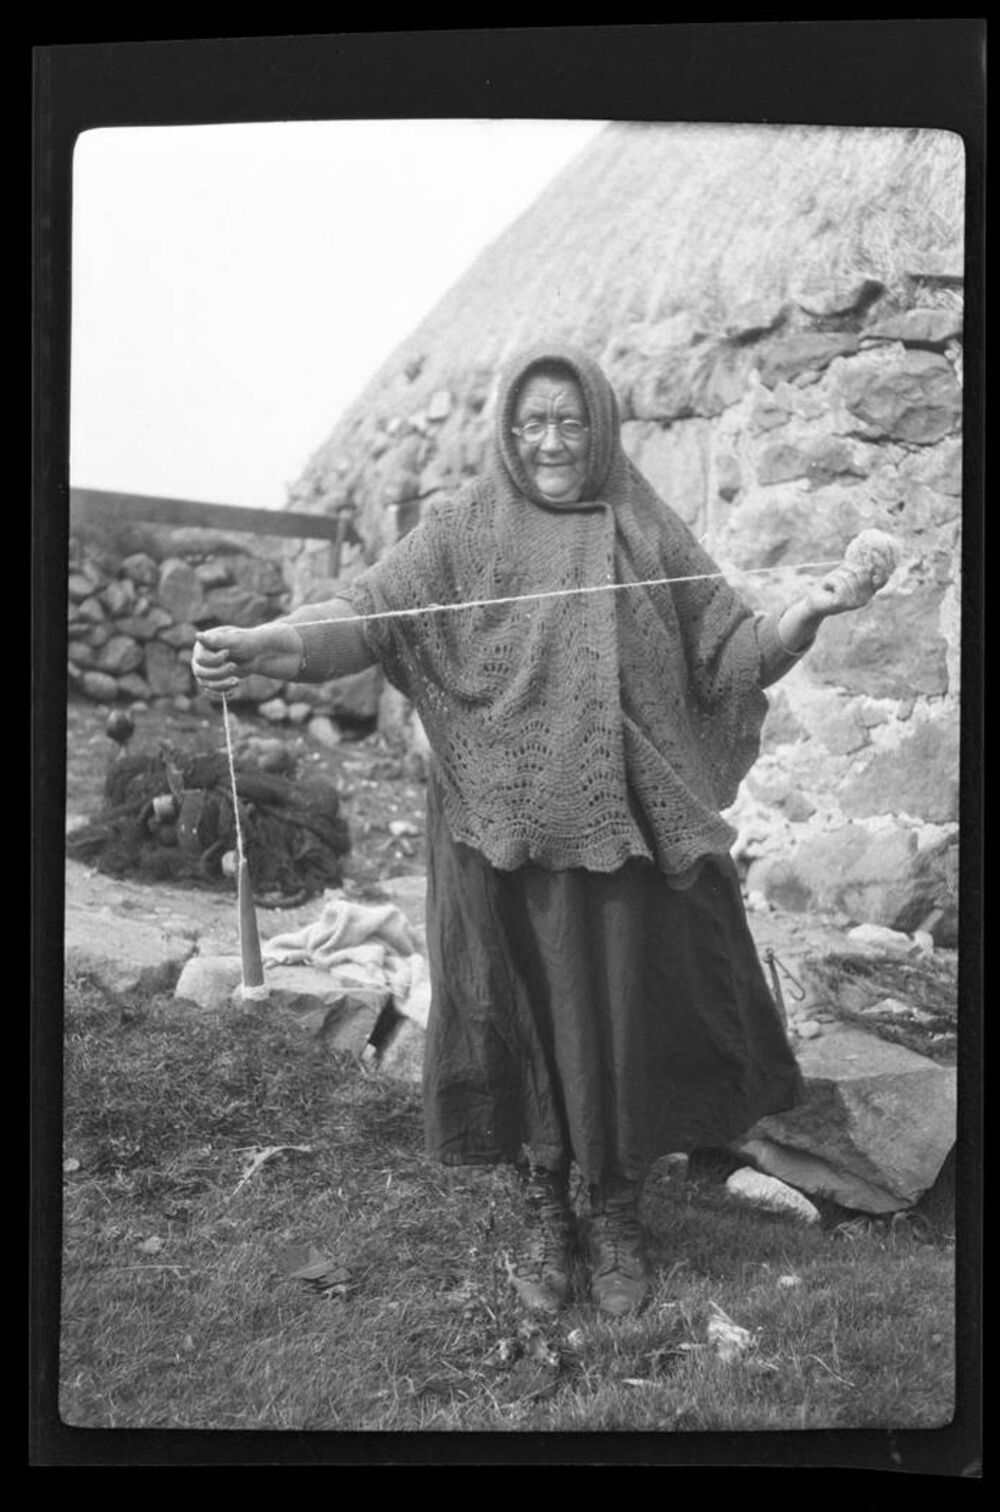 A black and white photo of an older woman spinning using a drop spindle. She stands outside wears a woollen headscarf.